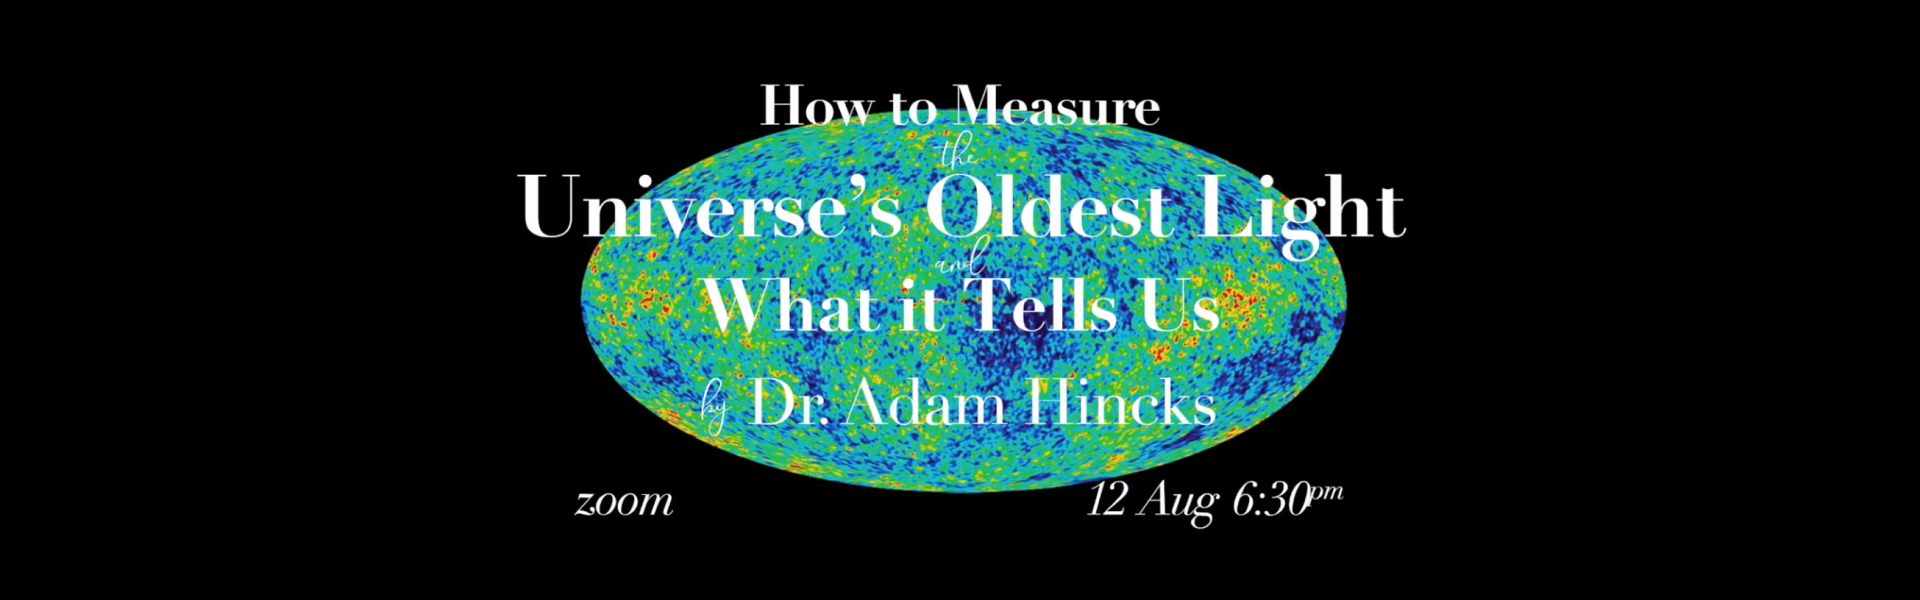 ASX - How to Measure the Unverse's Oldest Light